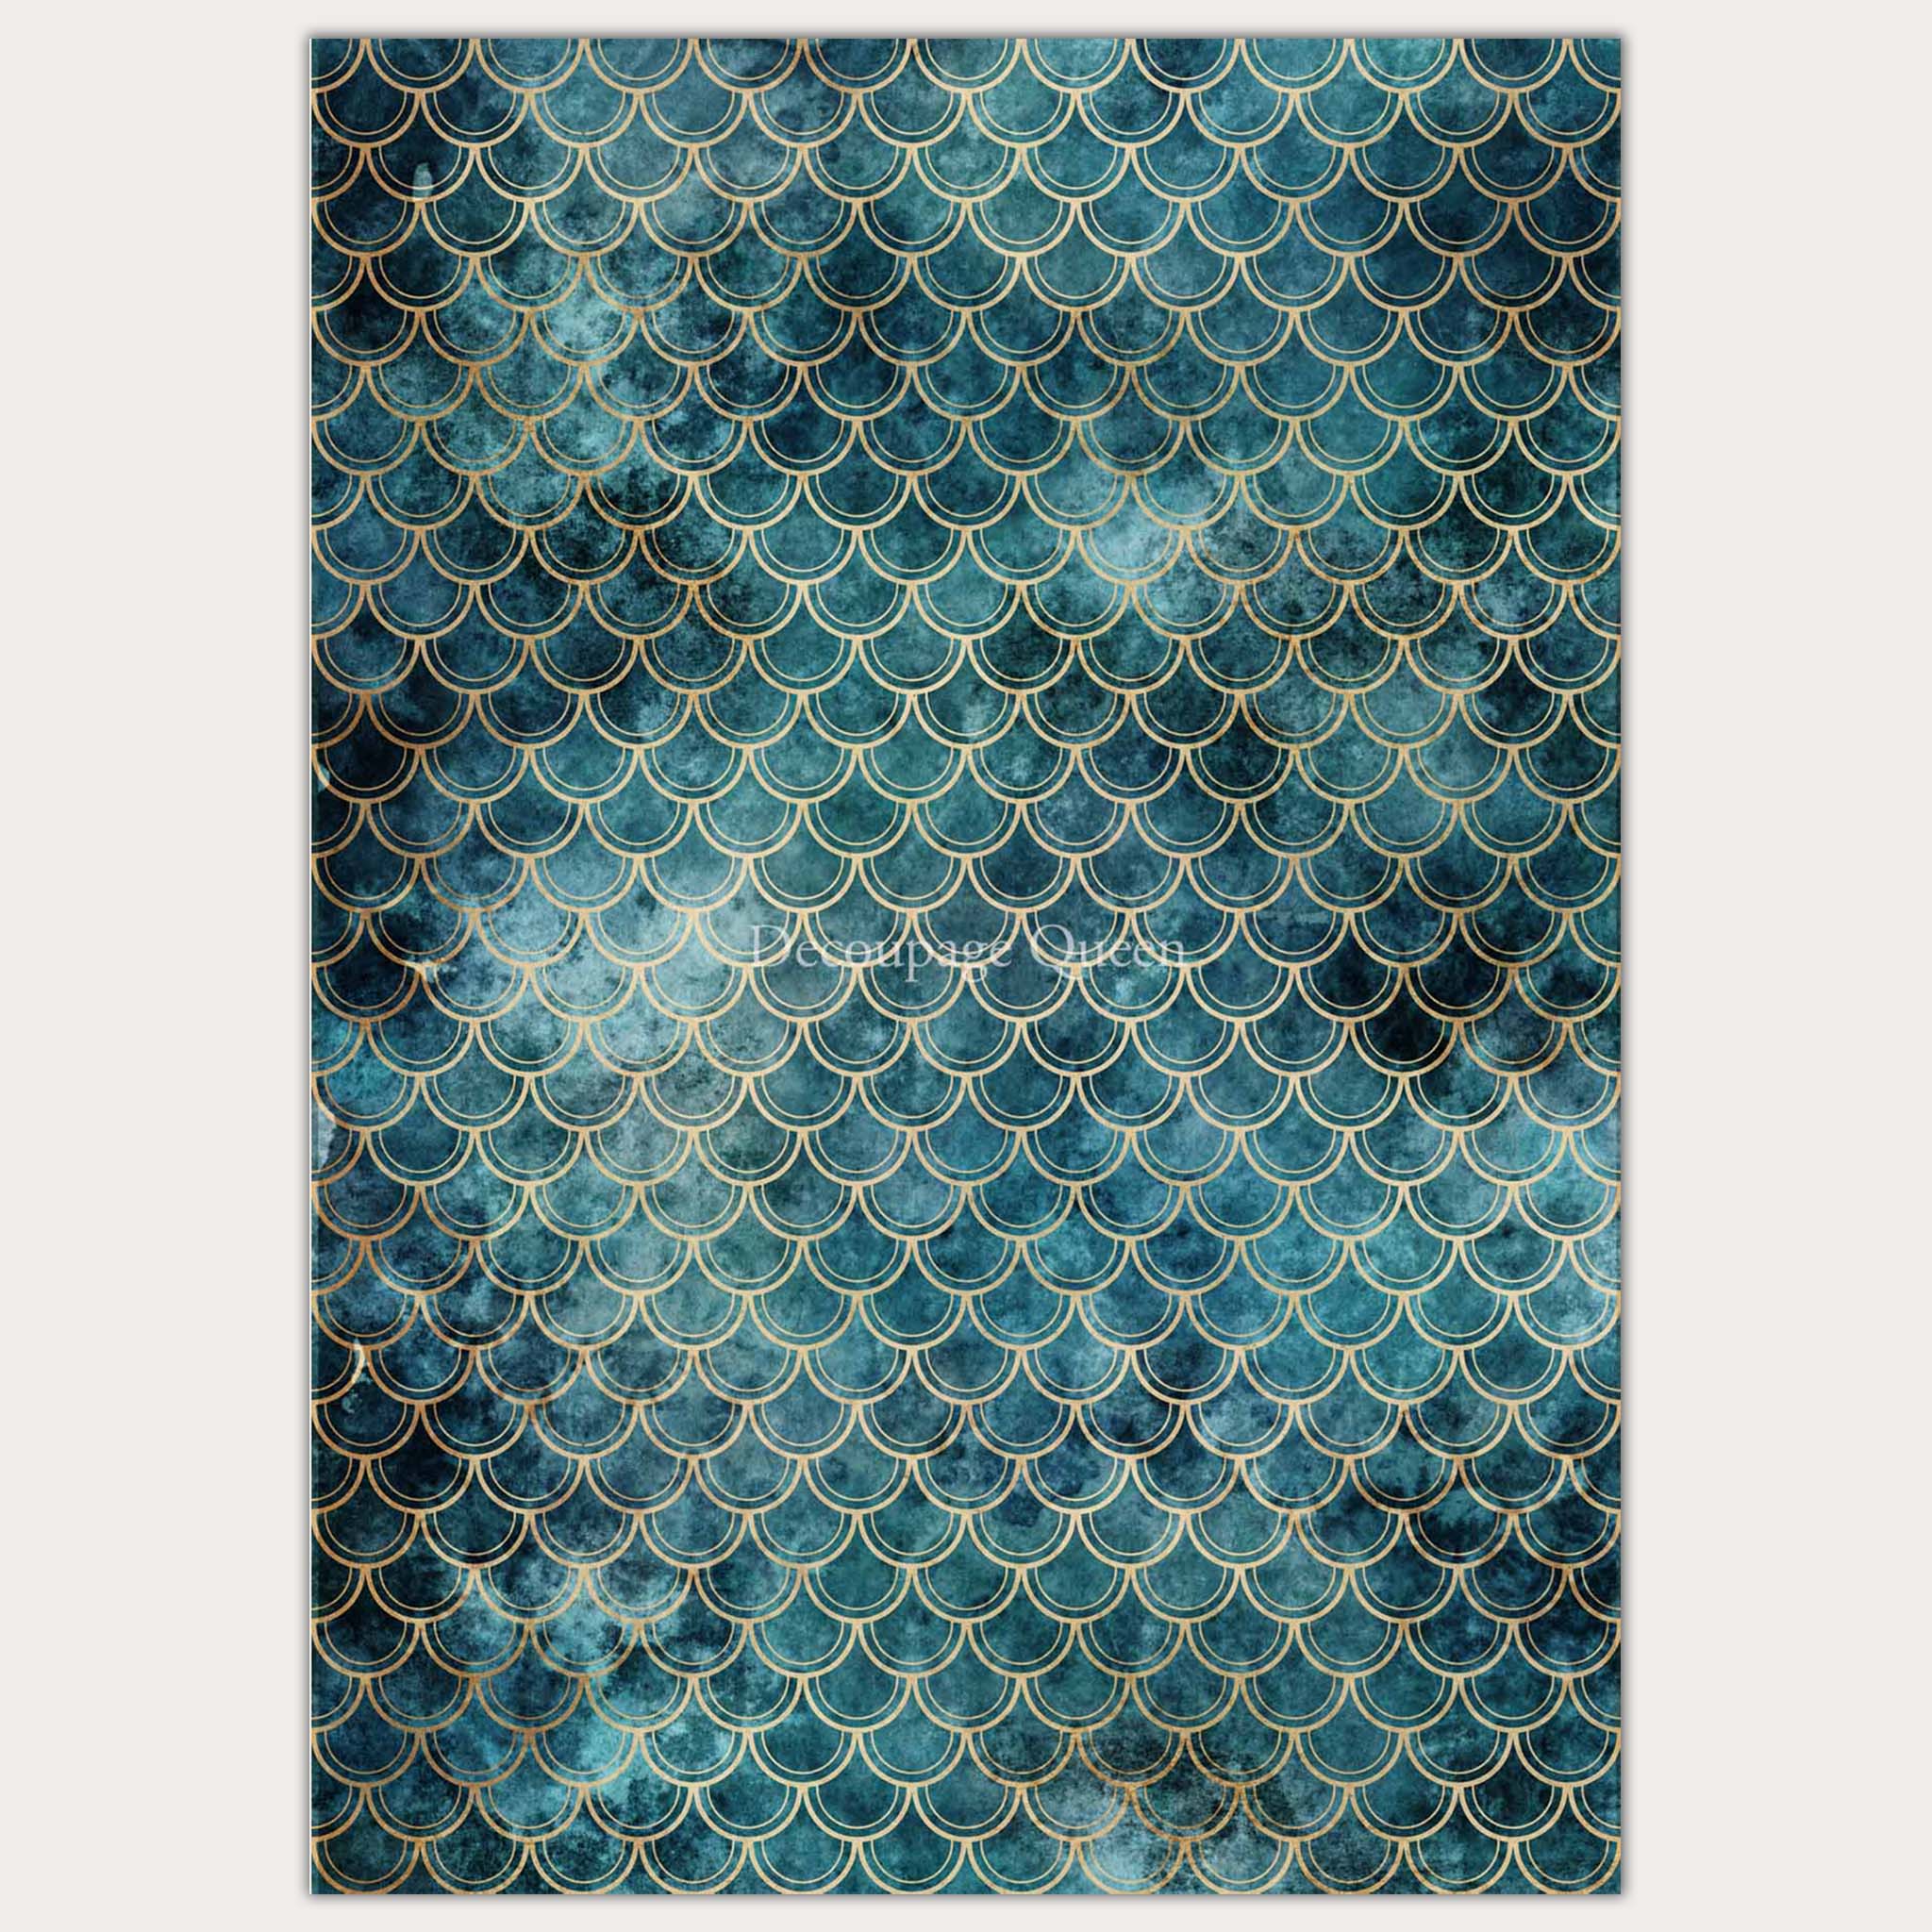 A0 rice paper design that features a blend of dark blue and teal with a gold mermaid scale pattern on it. White borders are on the sides.